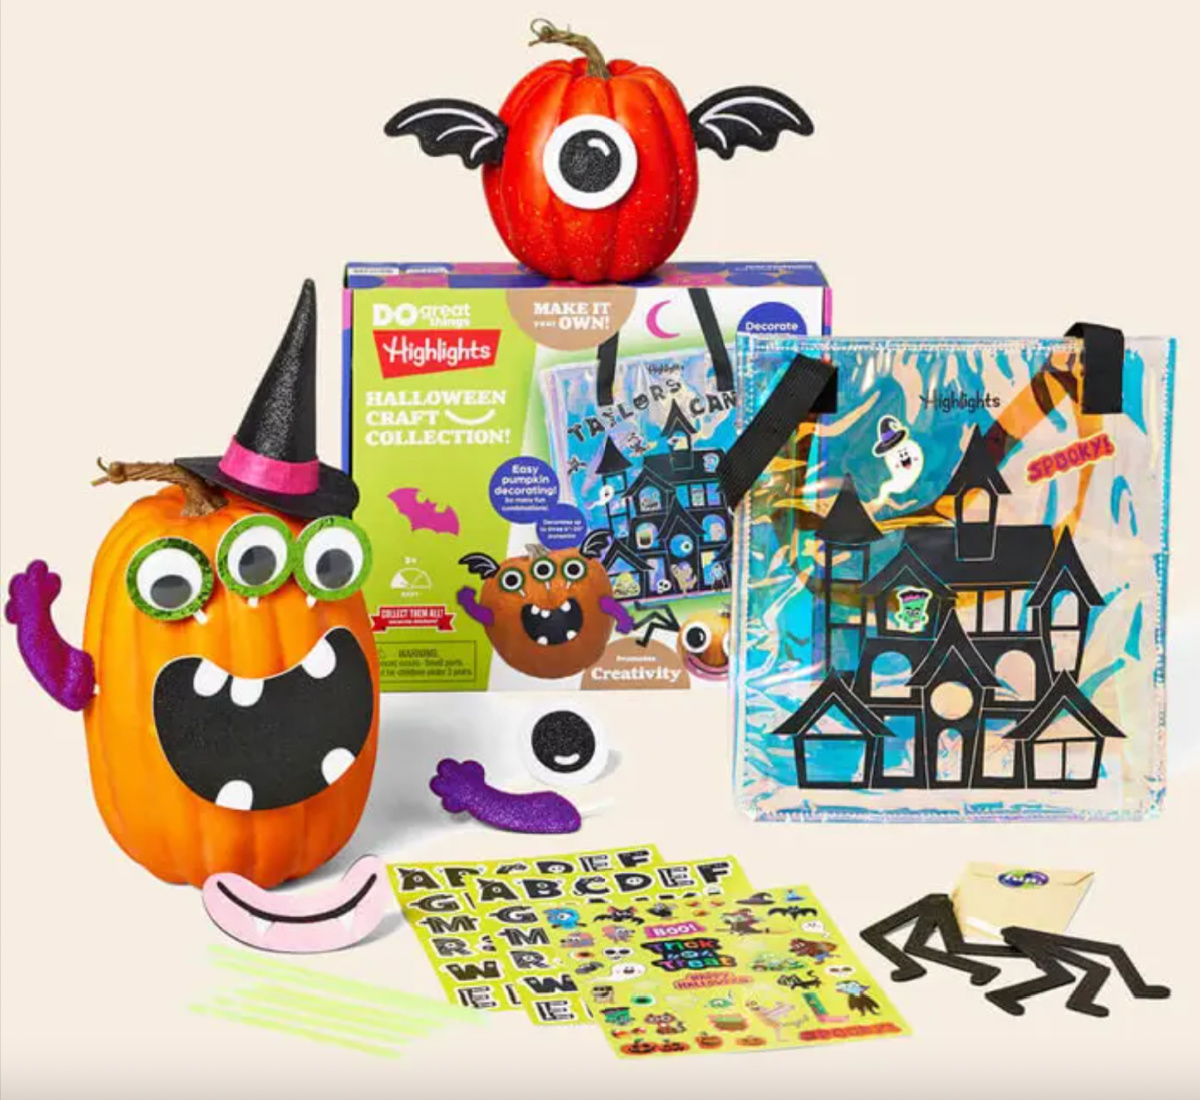 Highlights Halloween Books & Activities from $4.75 Shipped | Sticker Books, Mazes, Crafts, & More!